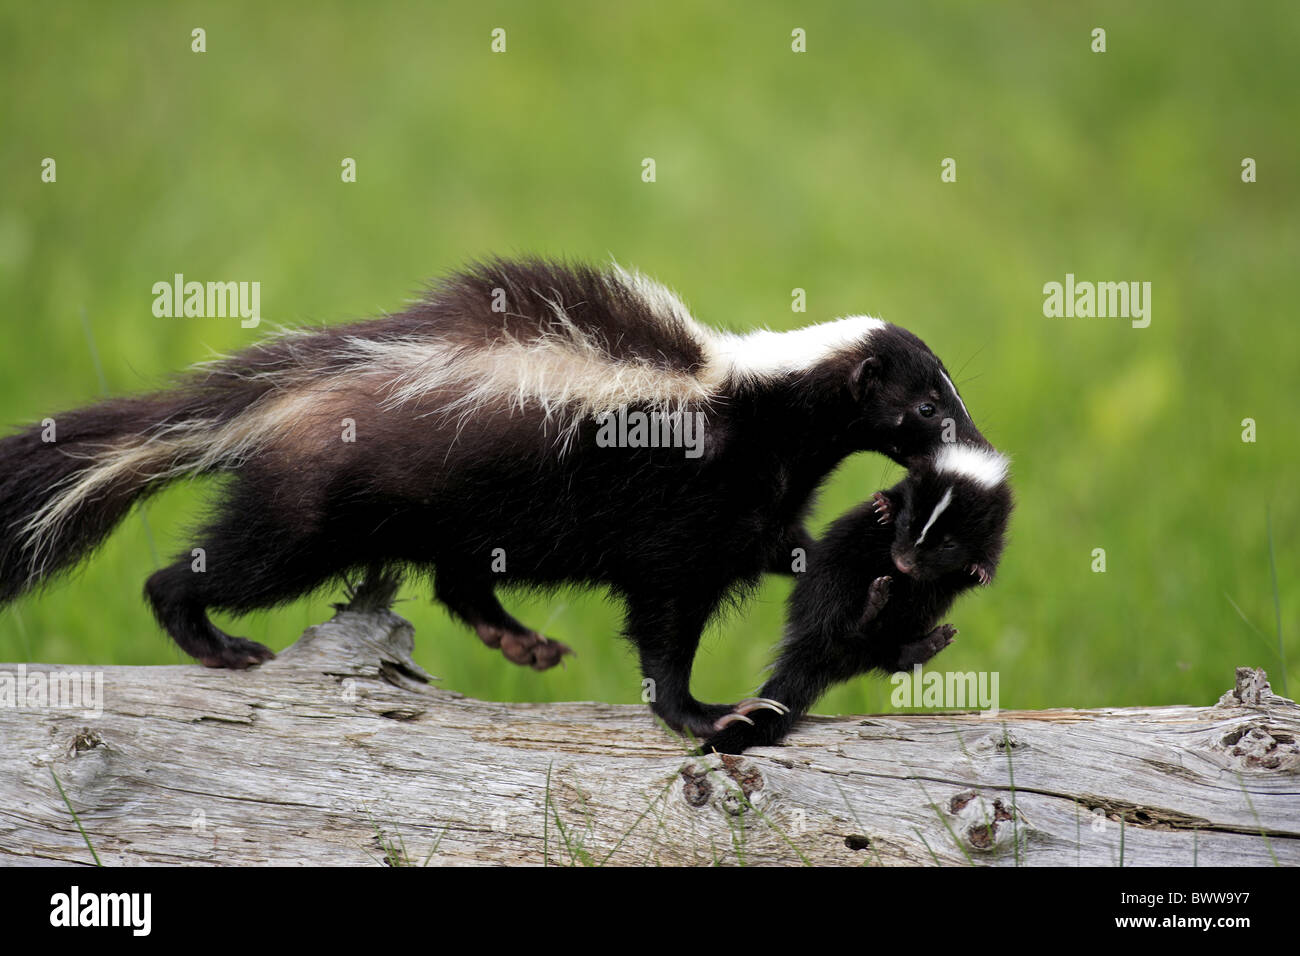 Mutter mit Baby - mother with baby Tragegriff Nackenbiss - bite to carry  skunk skunks mustelid mustelids mammal mammals animal Stock Photo - Alamy